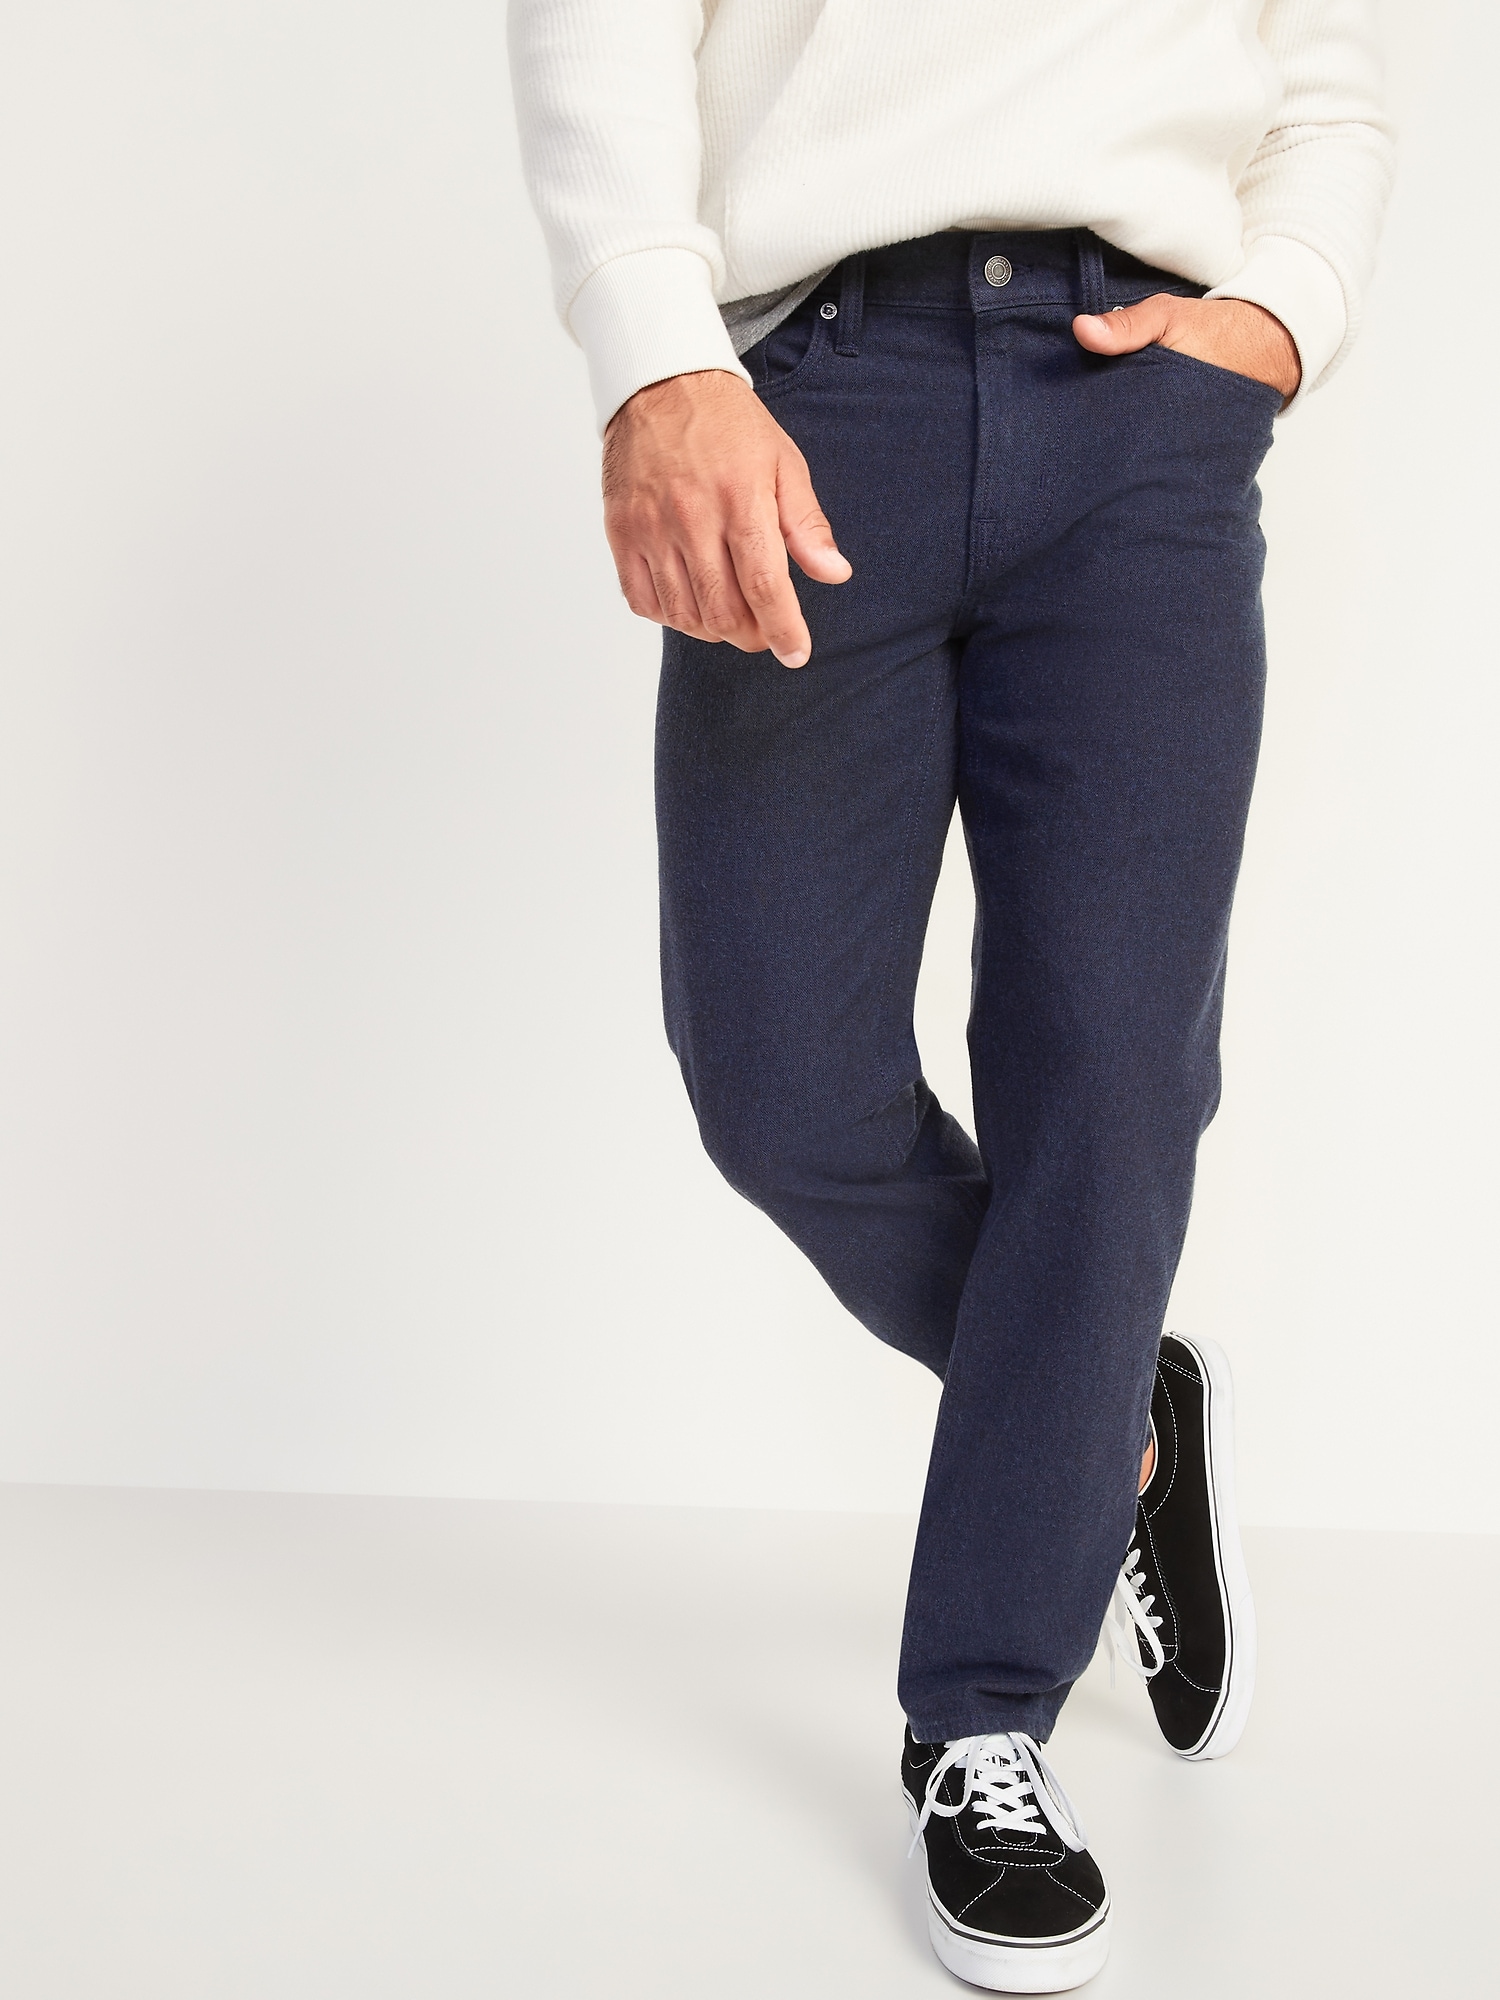 Relaxed Slim Taper Built-In Flex Textured Twill Jeans for Men